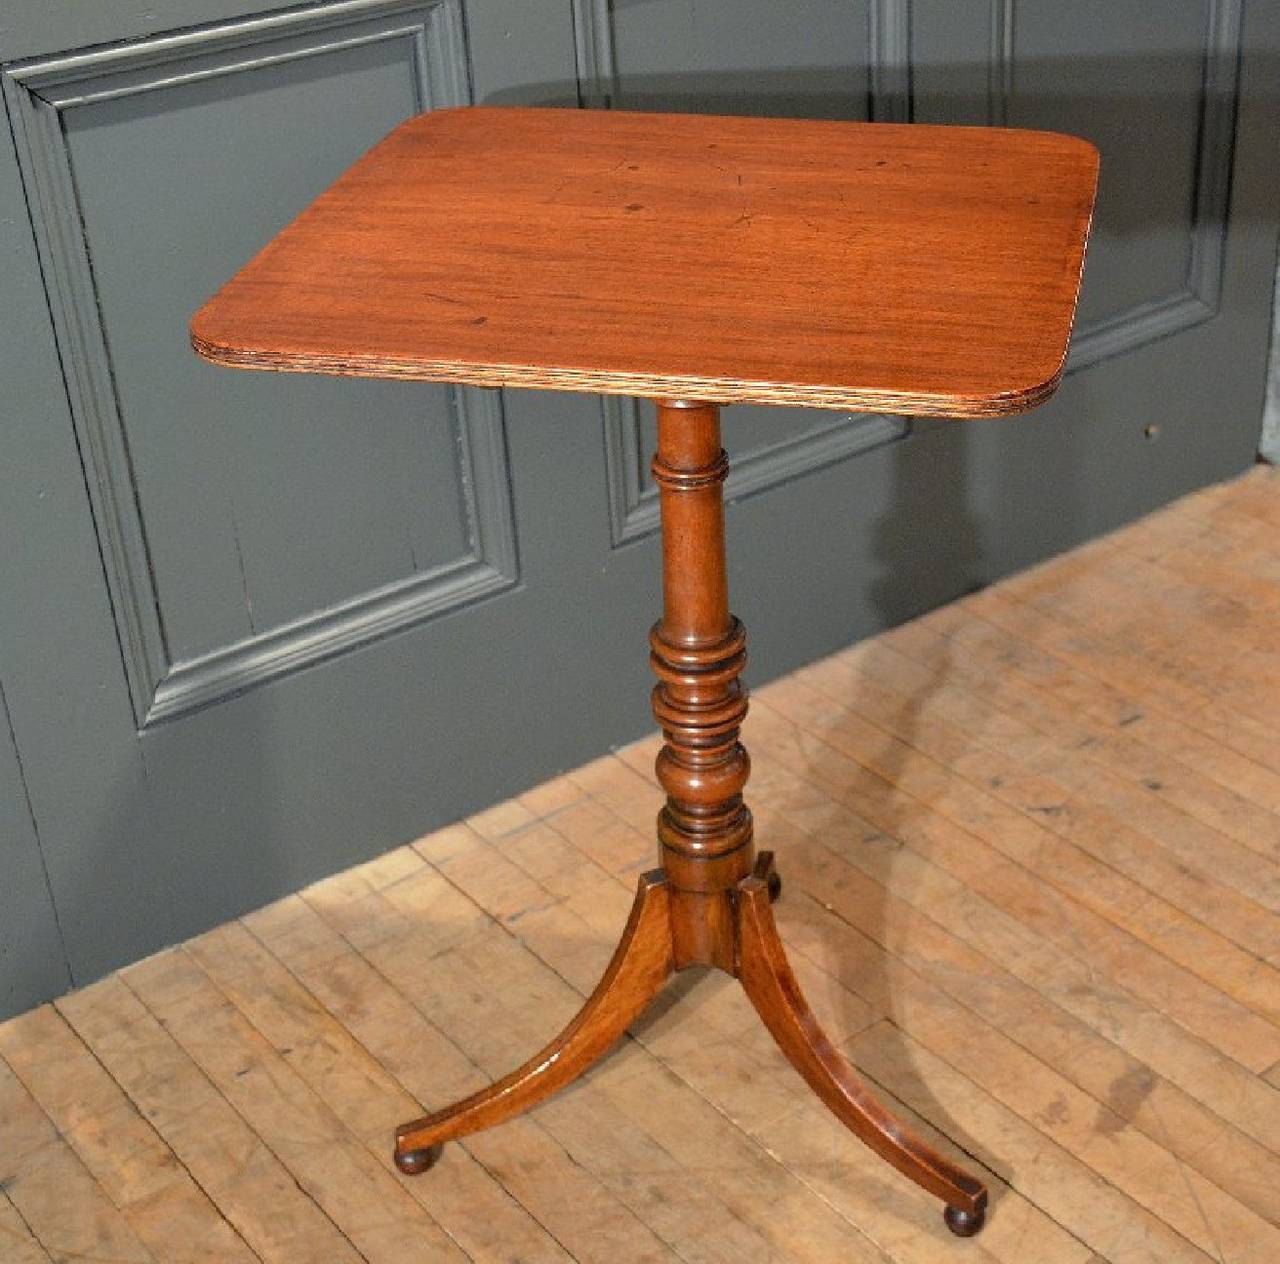 This versatile sized Regency mahogany tilt top wine table features a turned central base with three splay legs on ball feet. The table measures 20 in – 51 cm wide, 18 in – 45.7 cm deep and 28 in – 71 cm high when in opened table position. When the